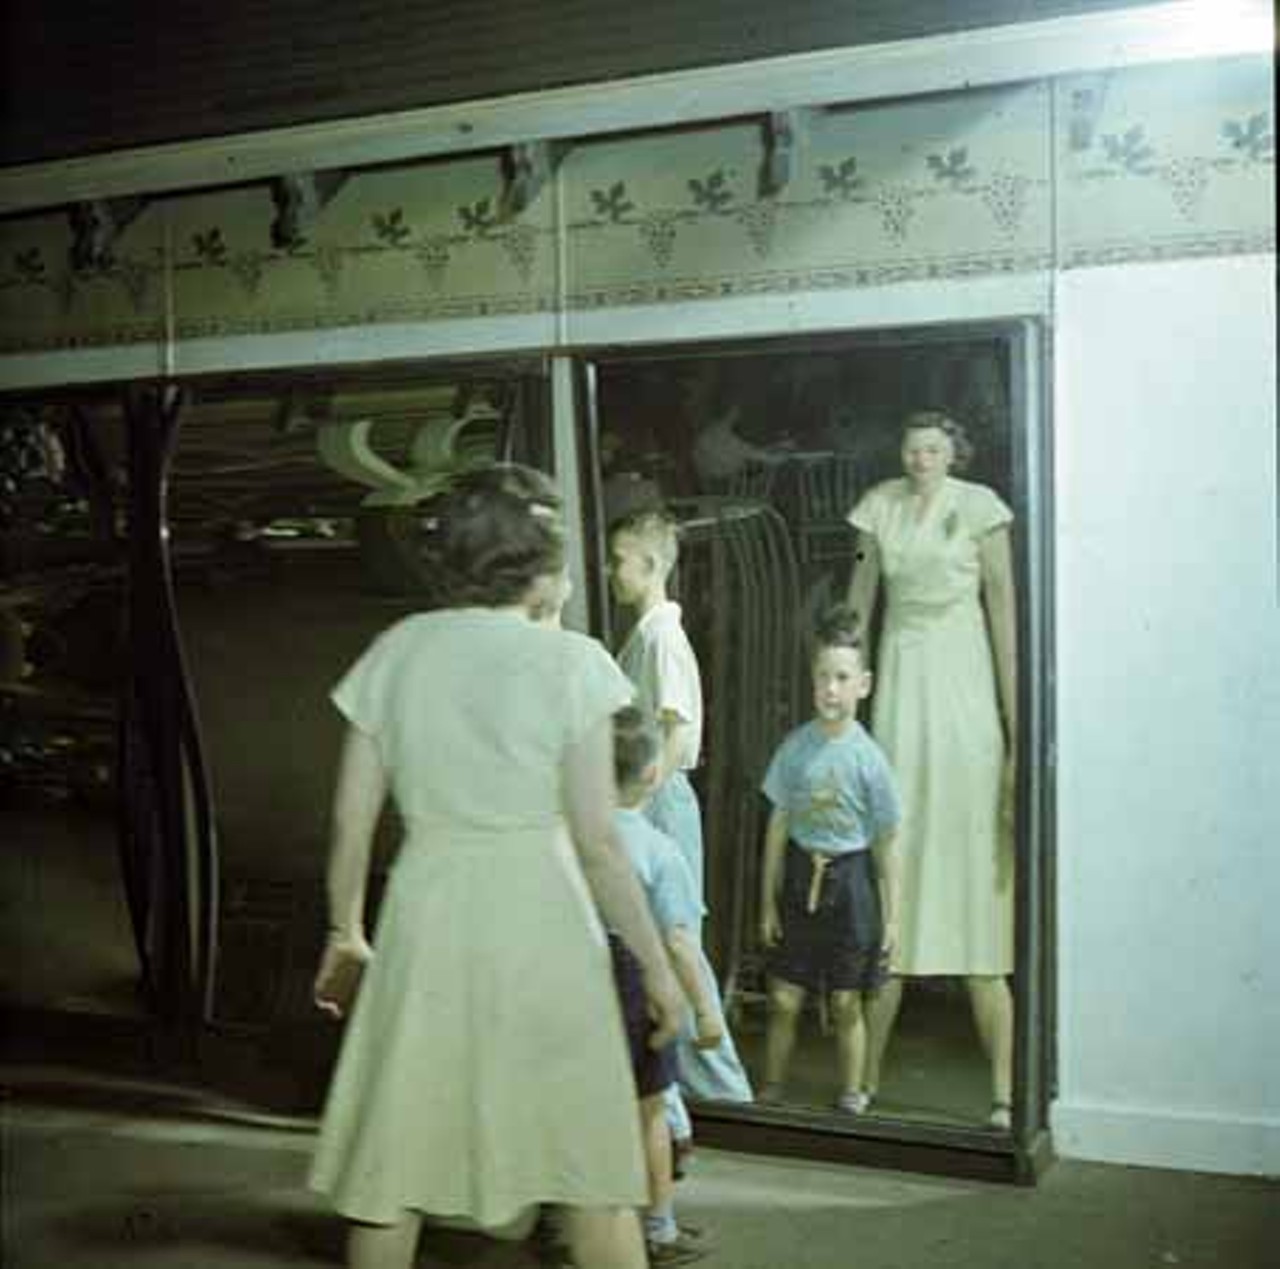 1947. Visitors get a kick out of the fun house mirrors.